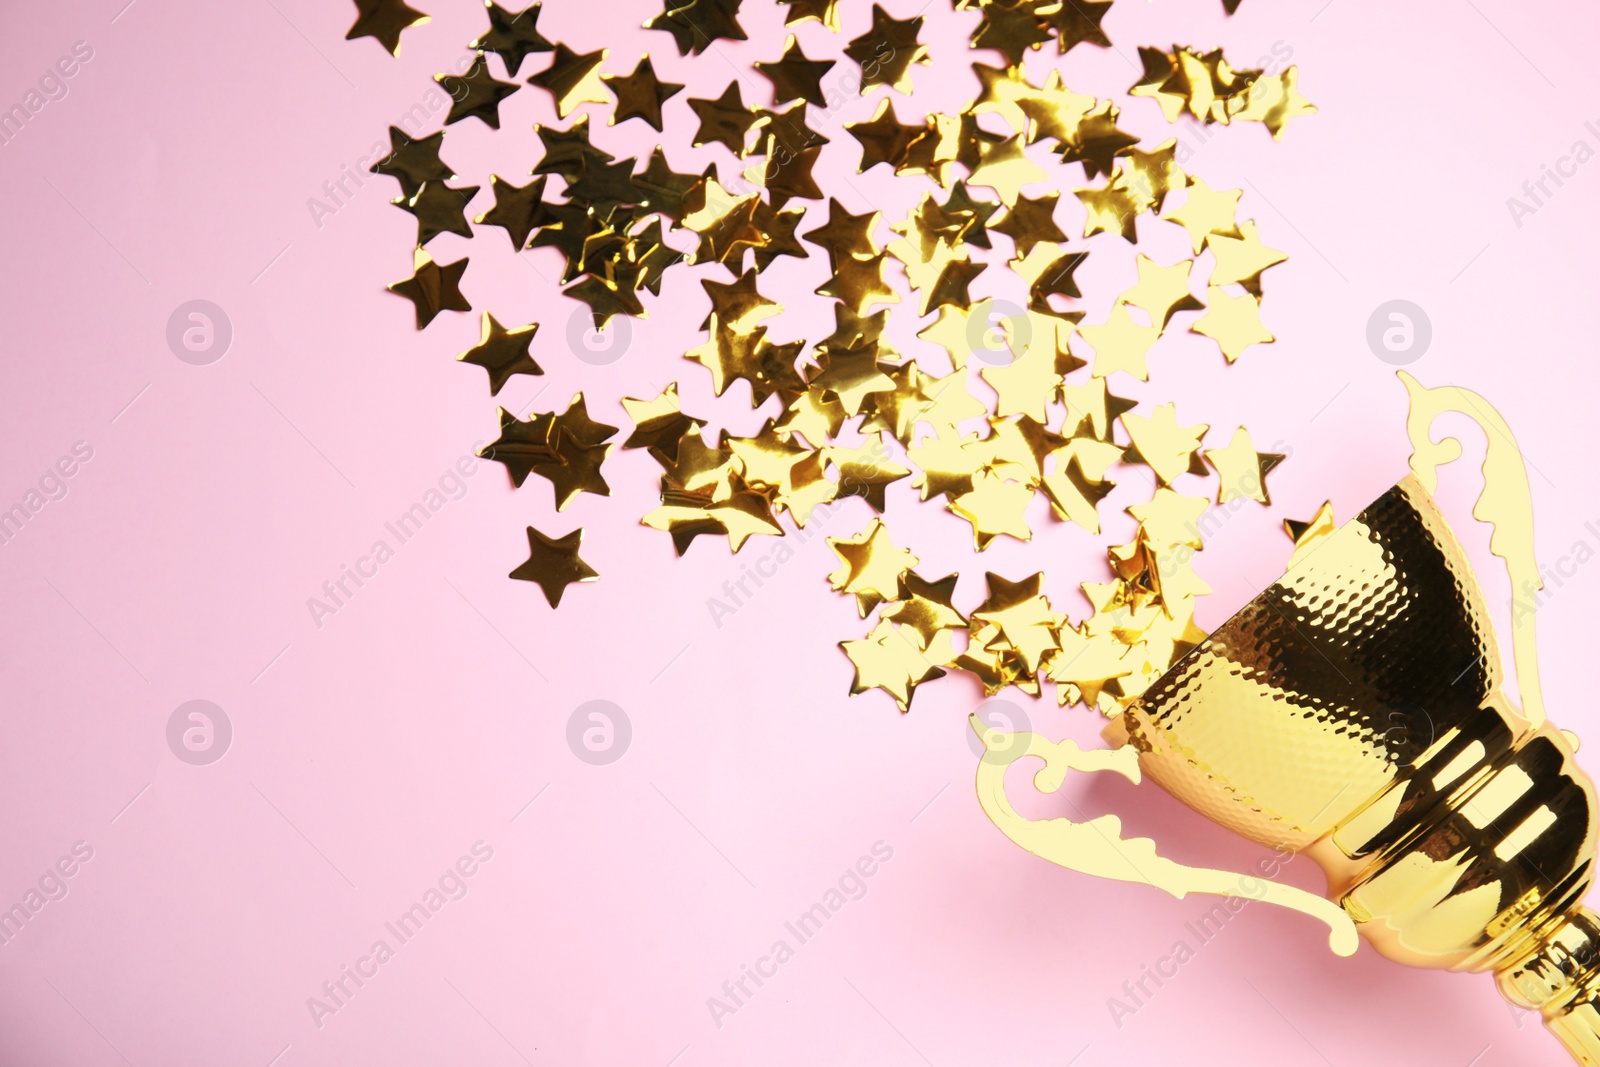 Photo of Golden trophy cup with confetti stars on pink background, flat lay